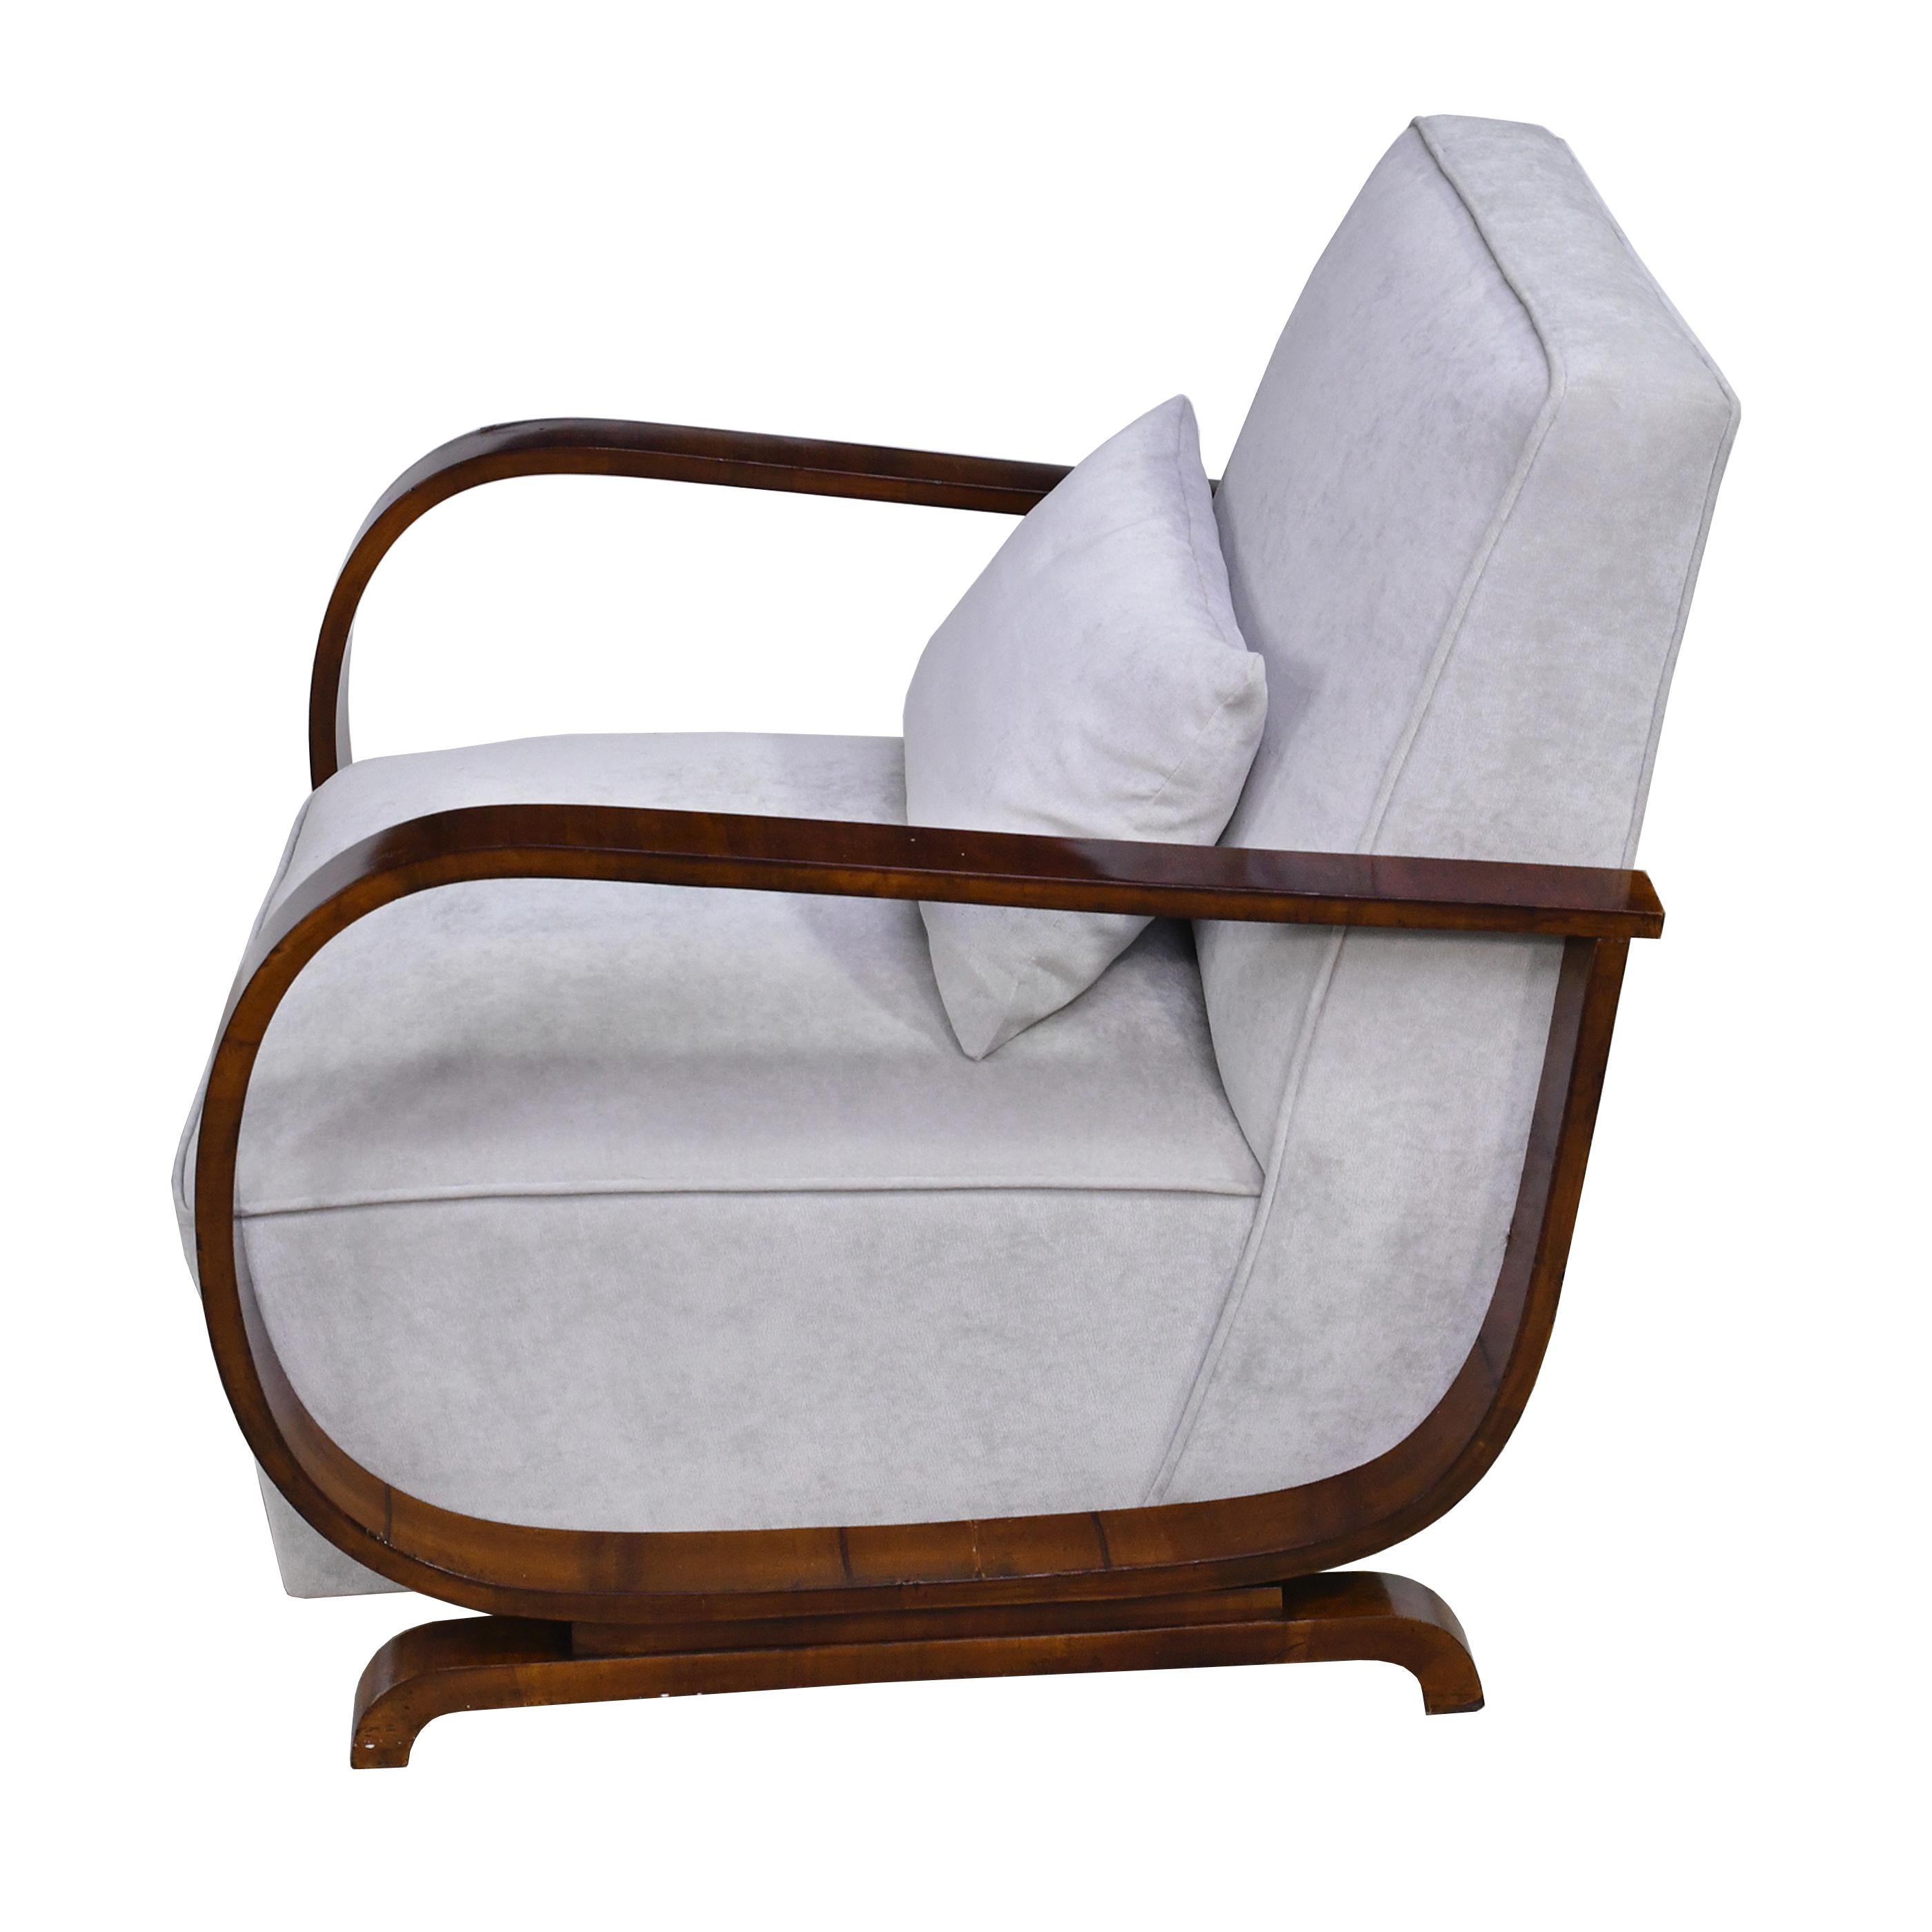 Early 20th Century Pair of Viennese Art Deco Armchairs in Walnut with Grey Upholstery, Austria